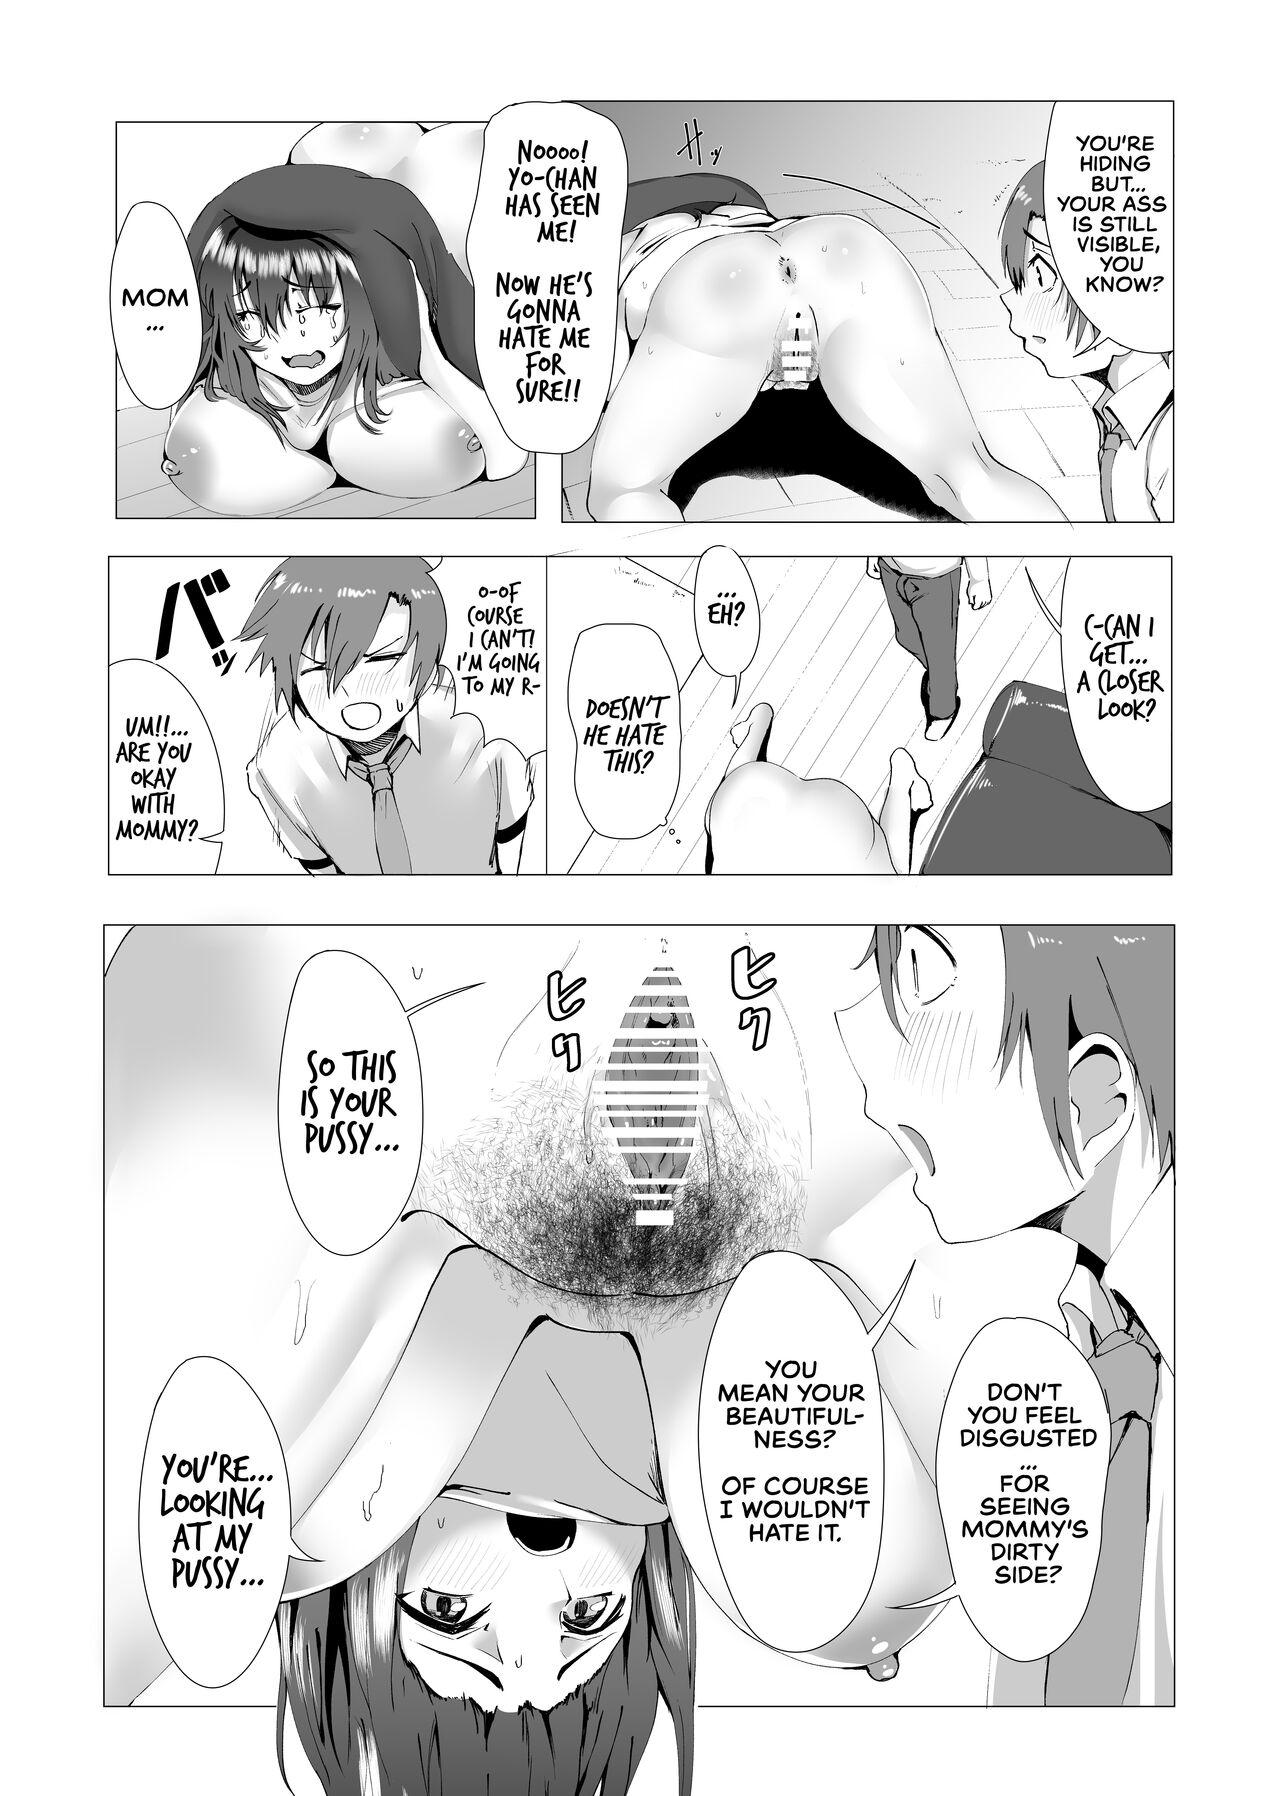 Tall Hontou ni Mama de Yoi no | Are You Okay With Mommy? - Original Cumswallow - Page 9